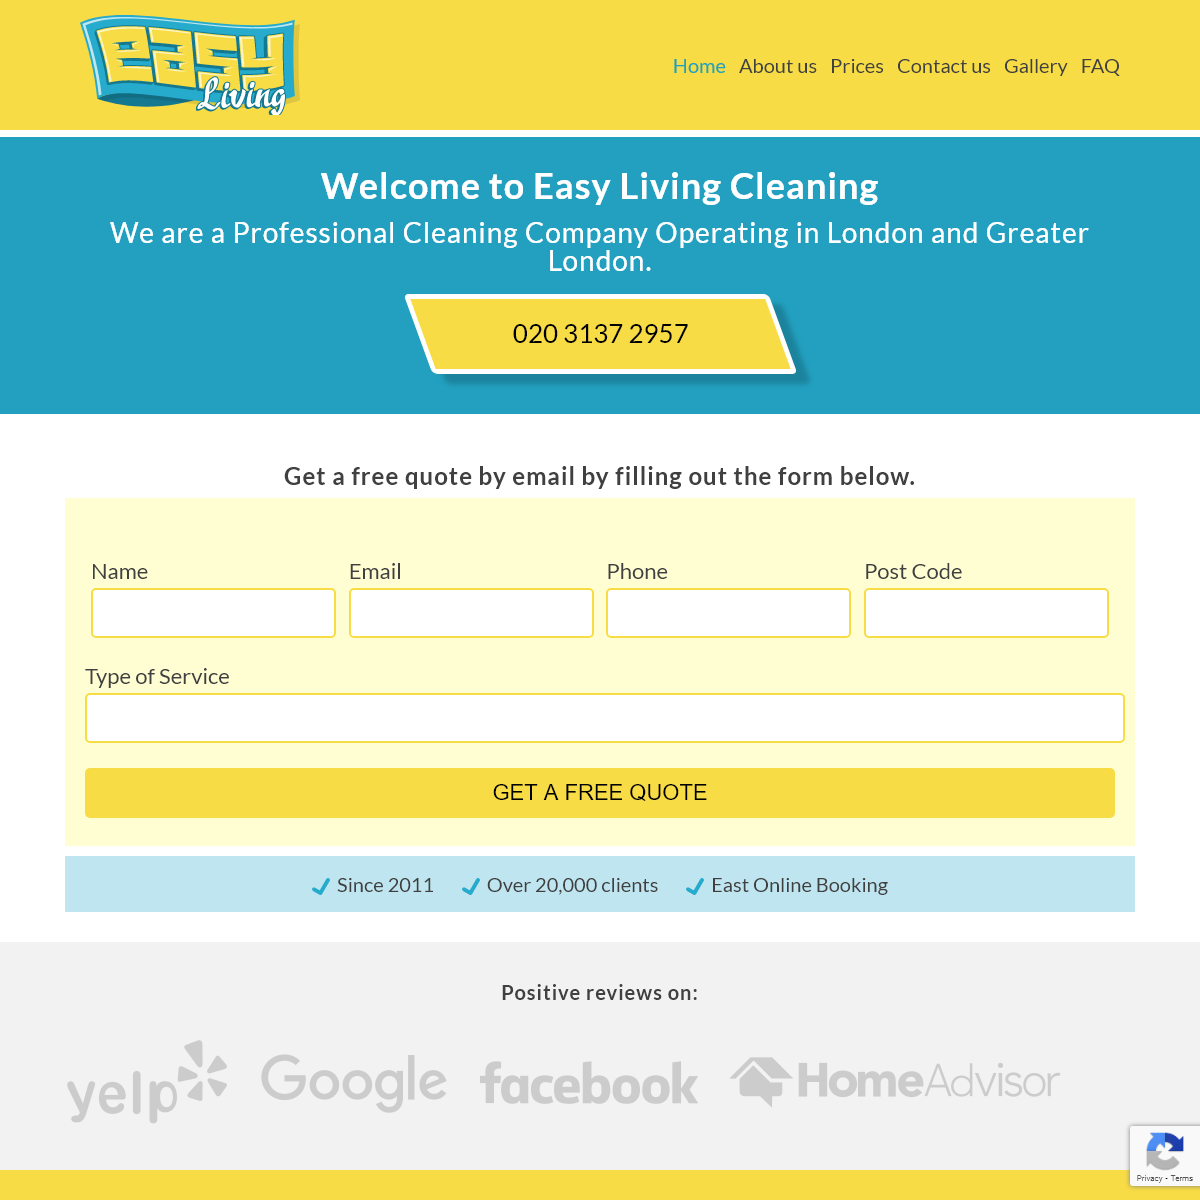 A complete backup of easyliving.co.uk